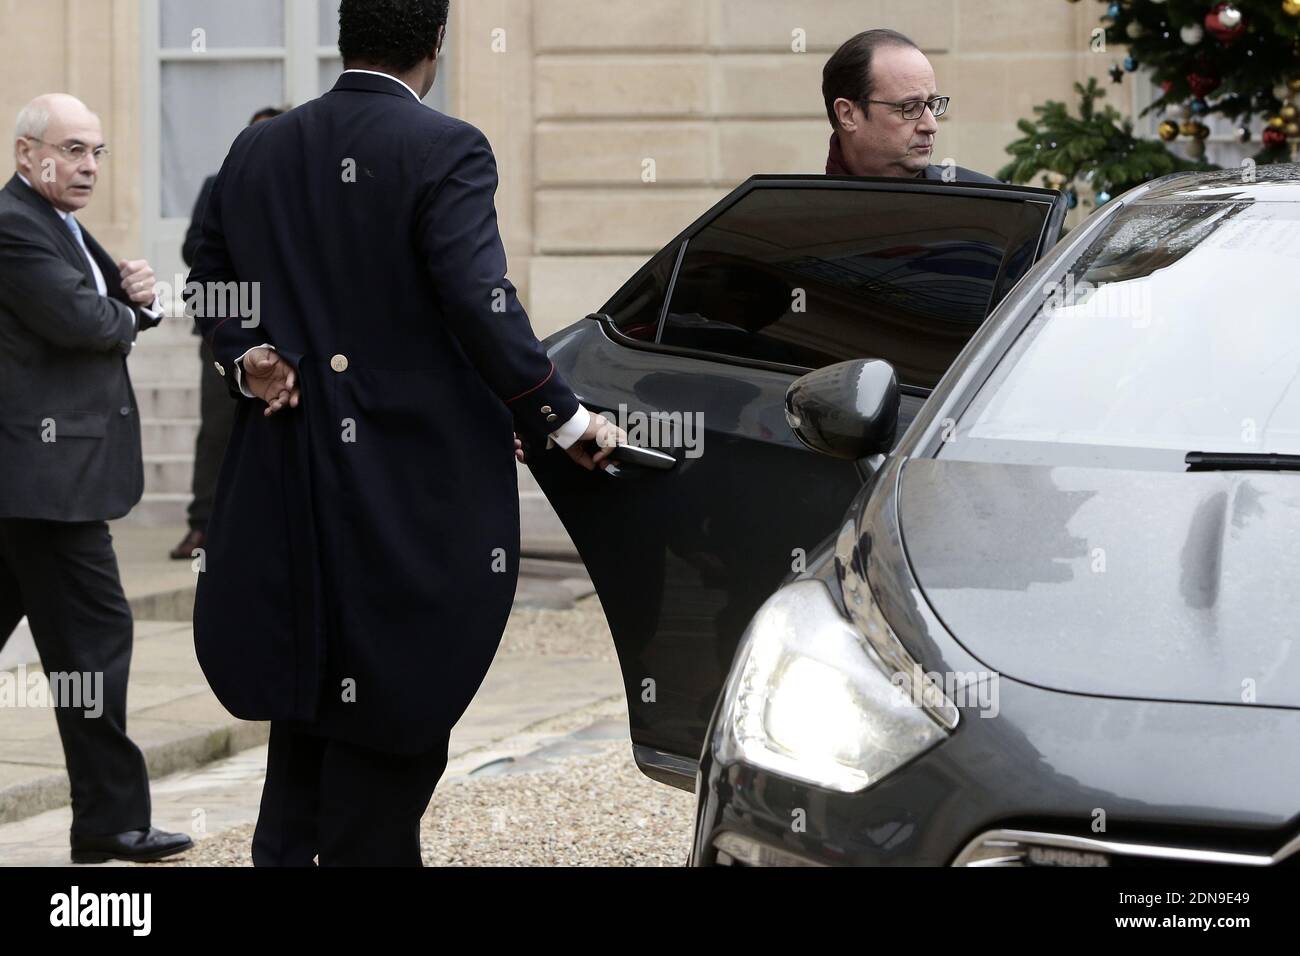 French President Francois Hollande is seen next to Thierry Lataste leaving the Elysee Palace and heading to the shooting scene at the Paris offices of satirical weekly Charlie Hebdo, in Paris, France on January 7, 2015. At least 12 people were killed - including two police officers - and 5 injured when two heavily armed gunmen stormed the offices. The magazine is most famous internationally for publishing a controversial series of cartoons depicting the Prophet Mohammed in 2012. Photo by Stephane Lemouton/ABACAPRESS.COM Stock Photo